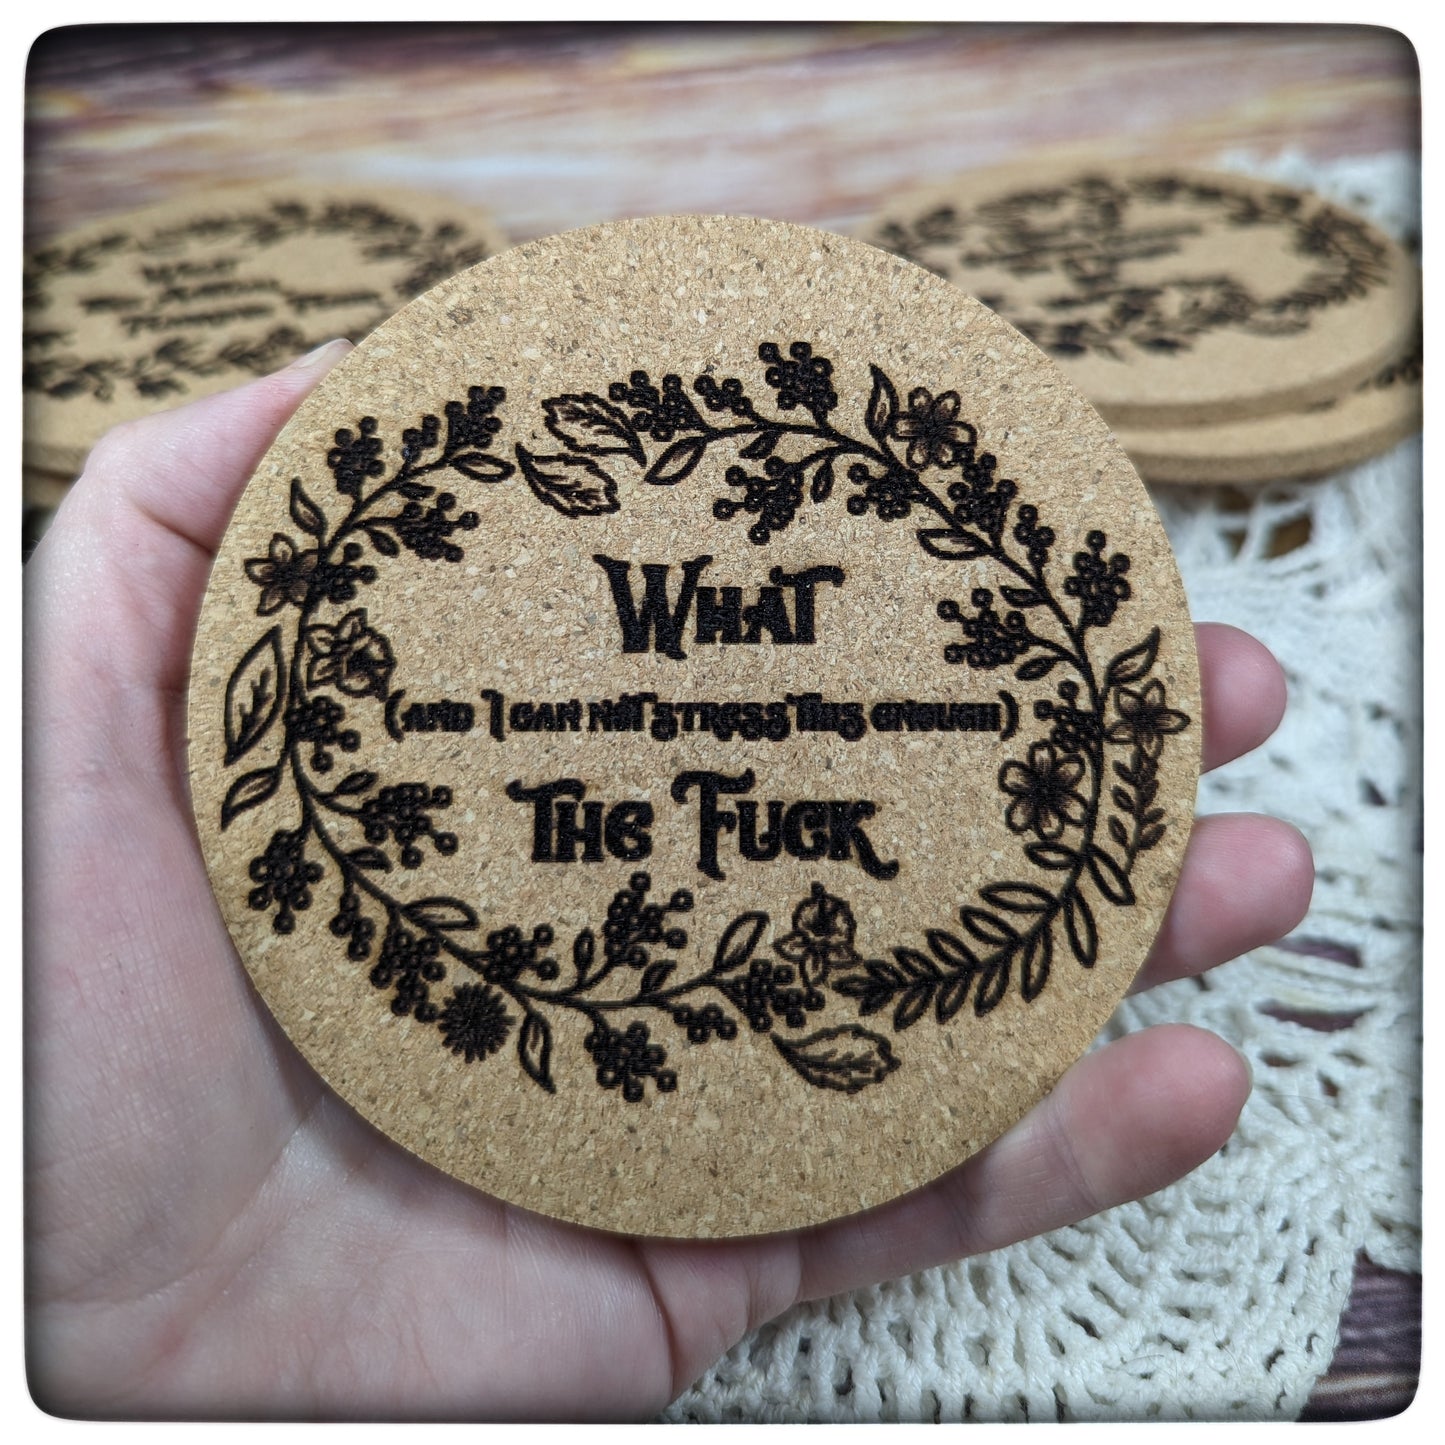 "What (and I can not...)" cork coaster